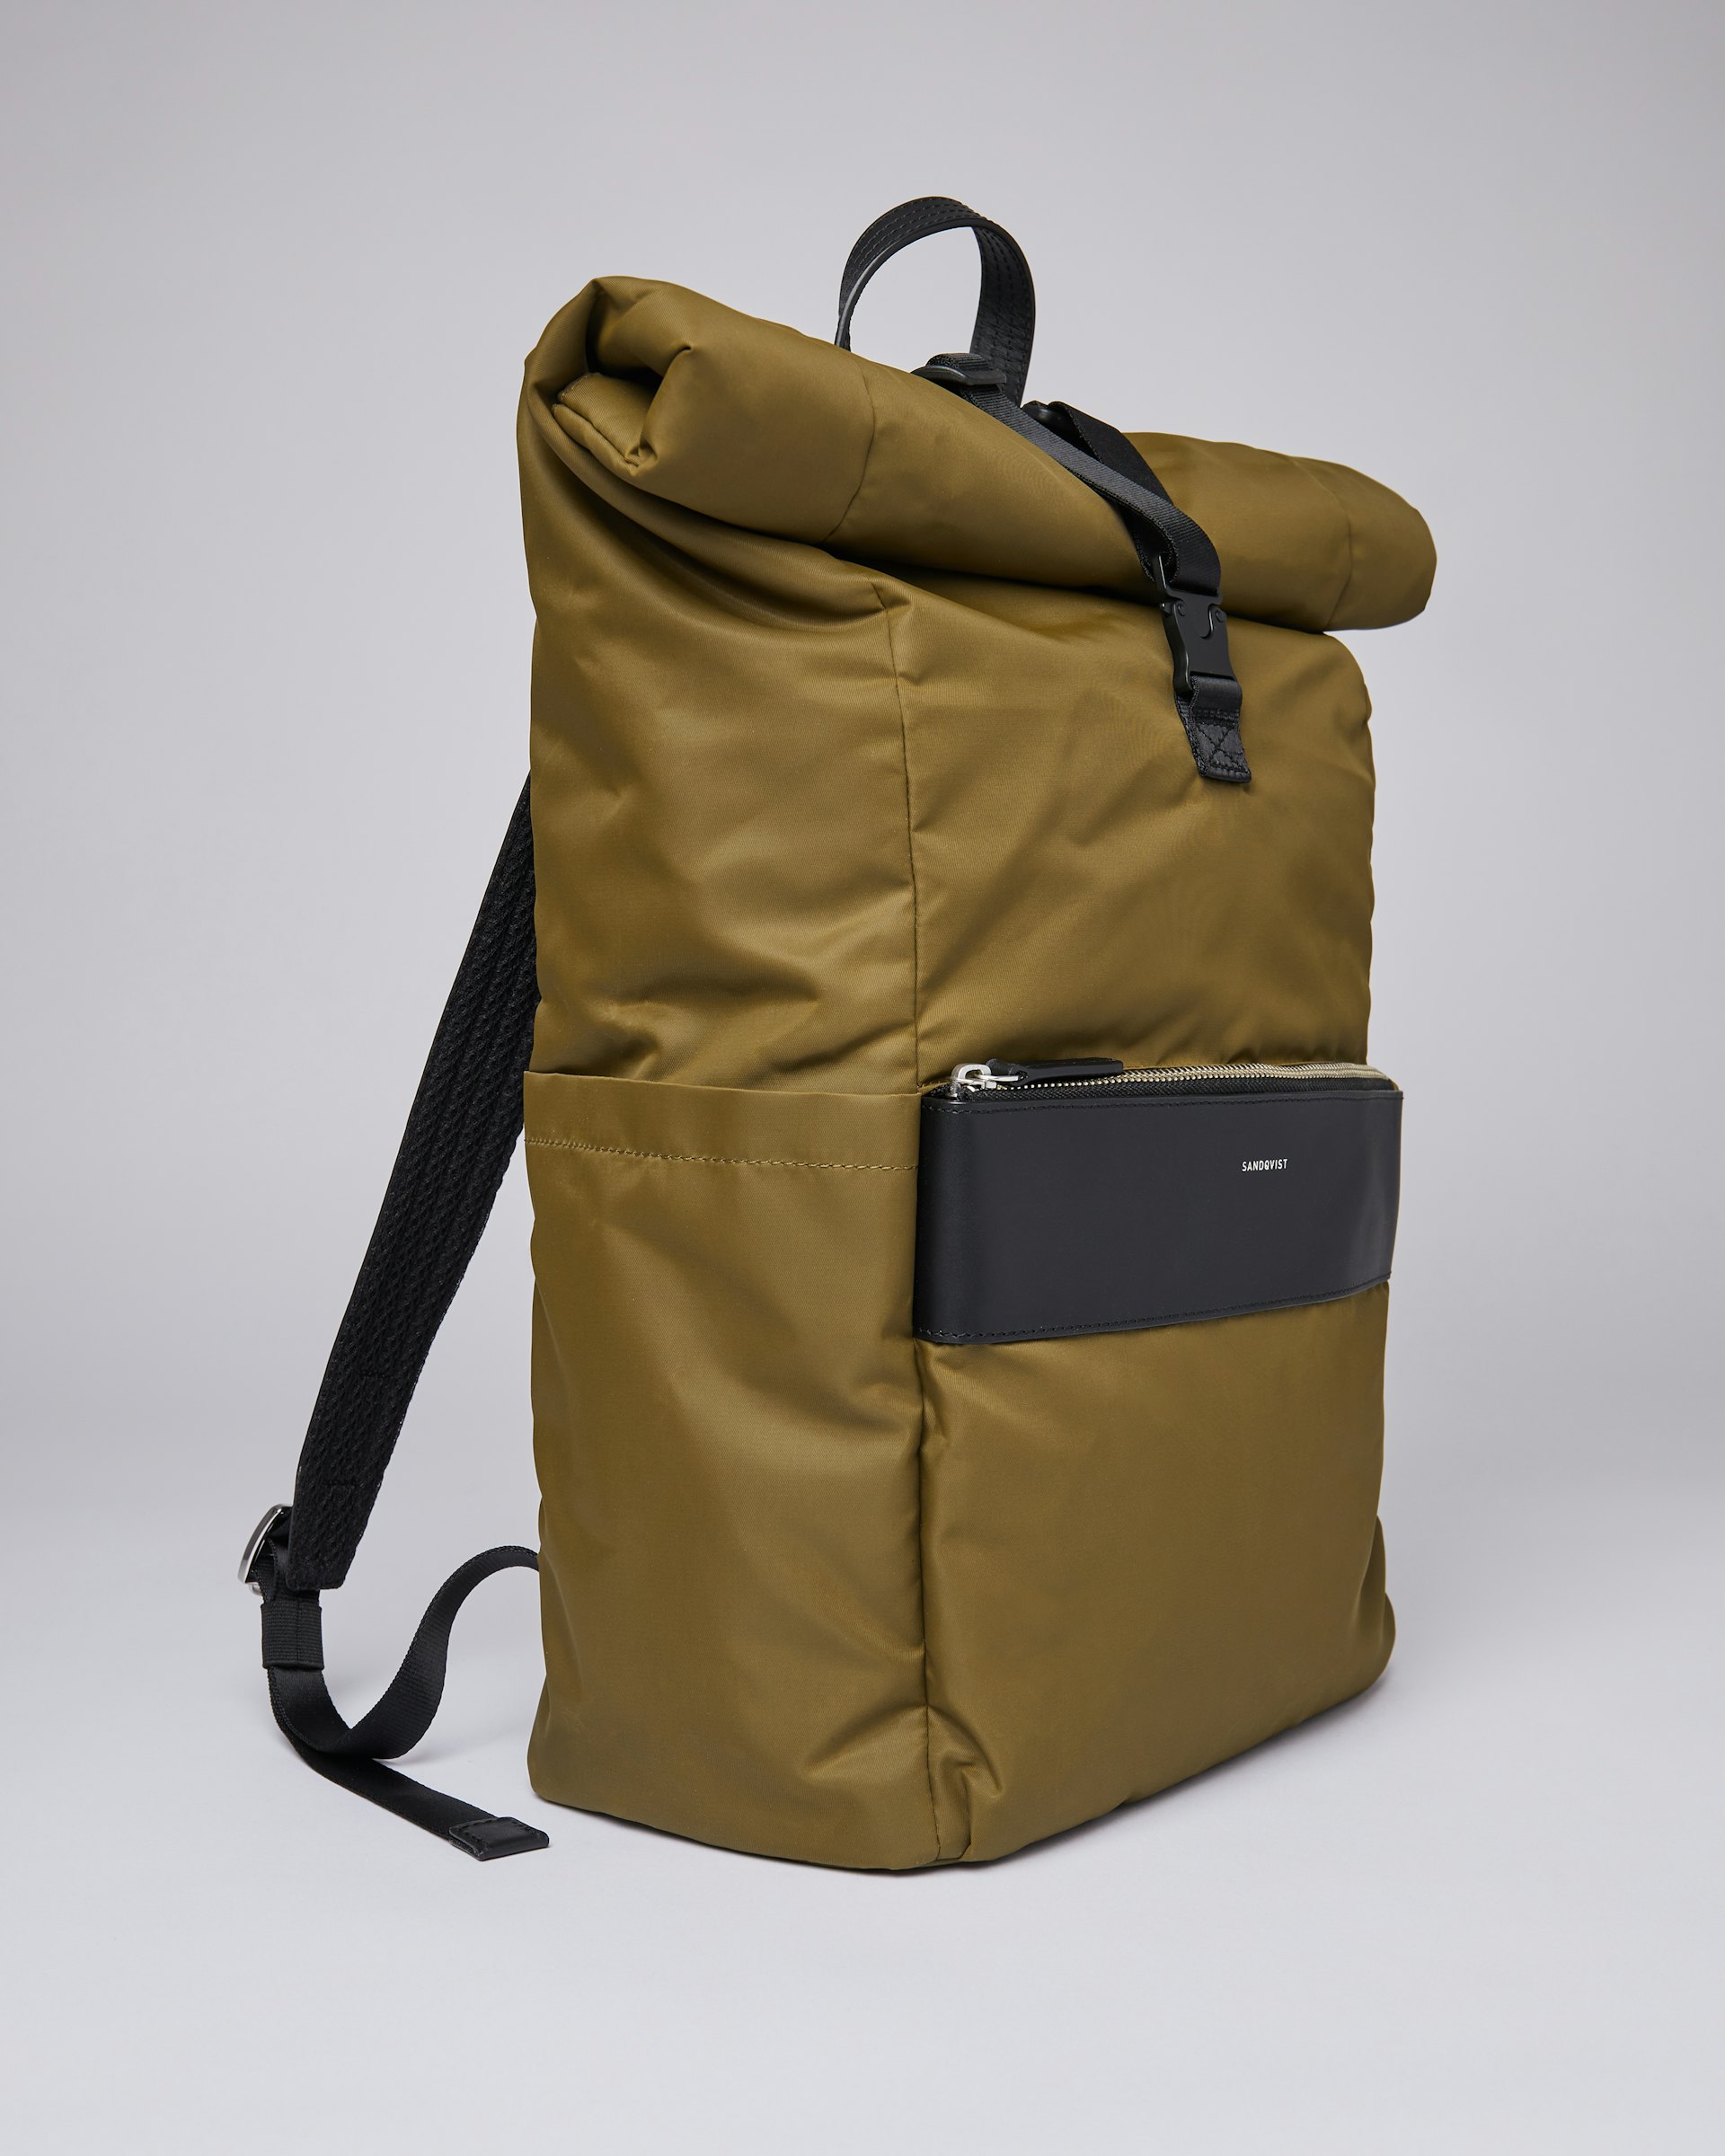 Albus belongs to the category Backpacks and is in color military olive (4 of 7)